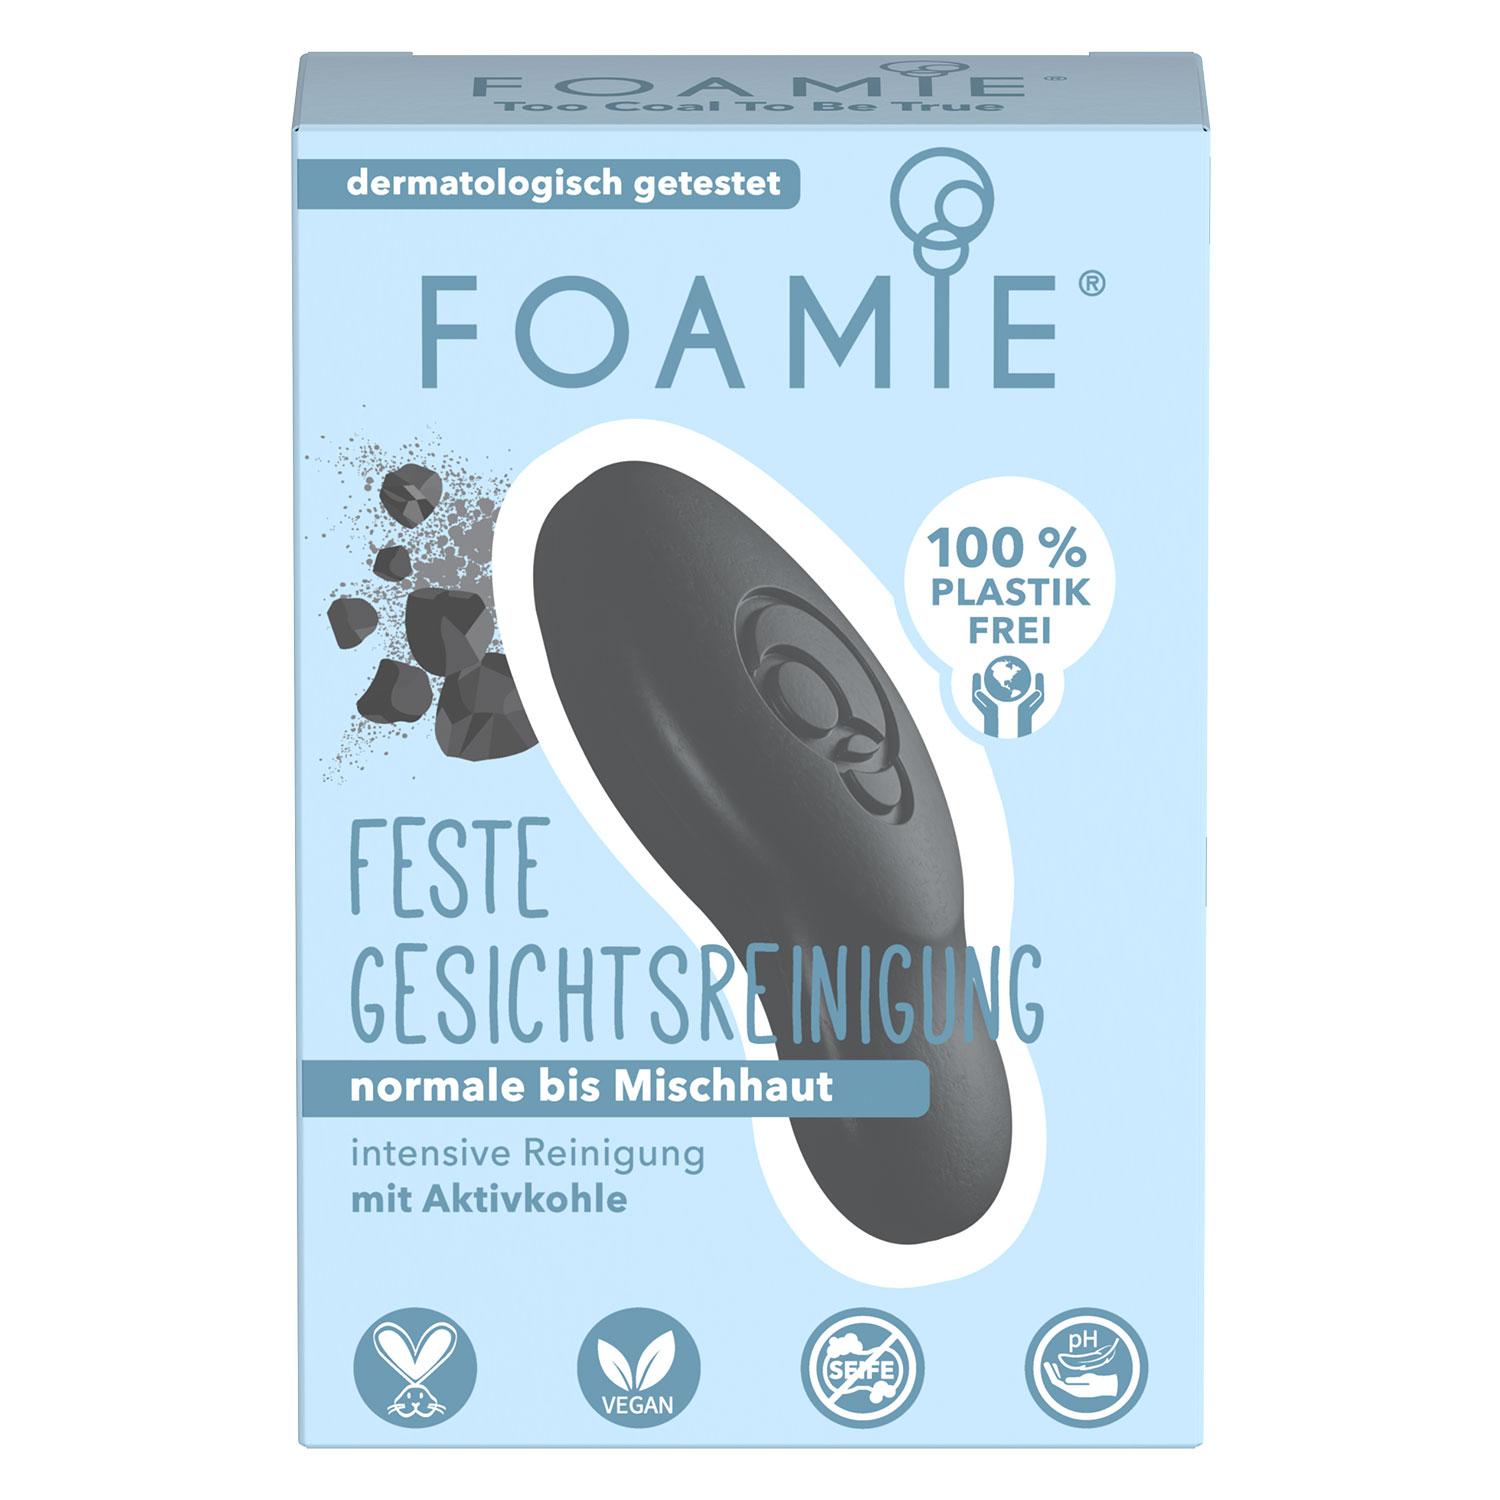 Foamie - Solid Face Cleansing Too Coal To Be True